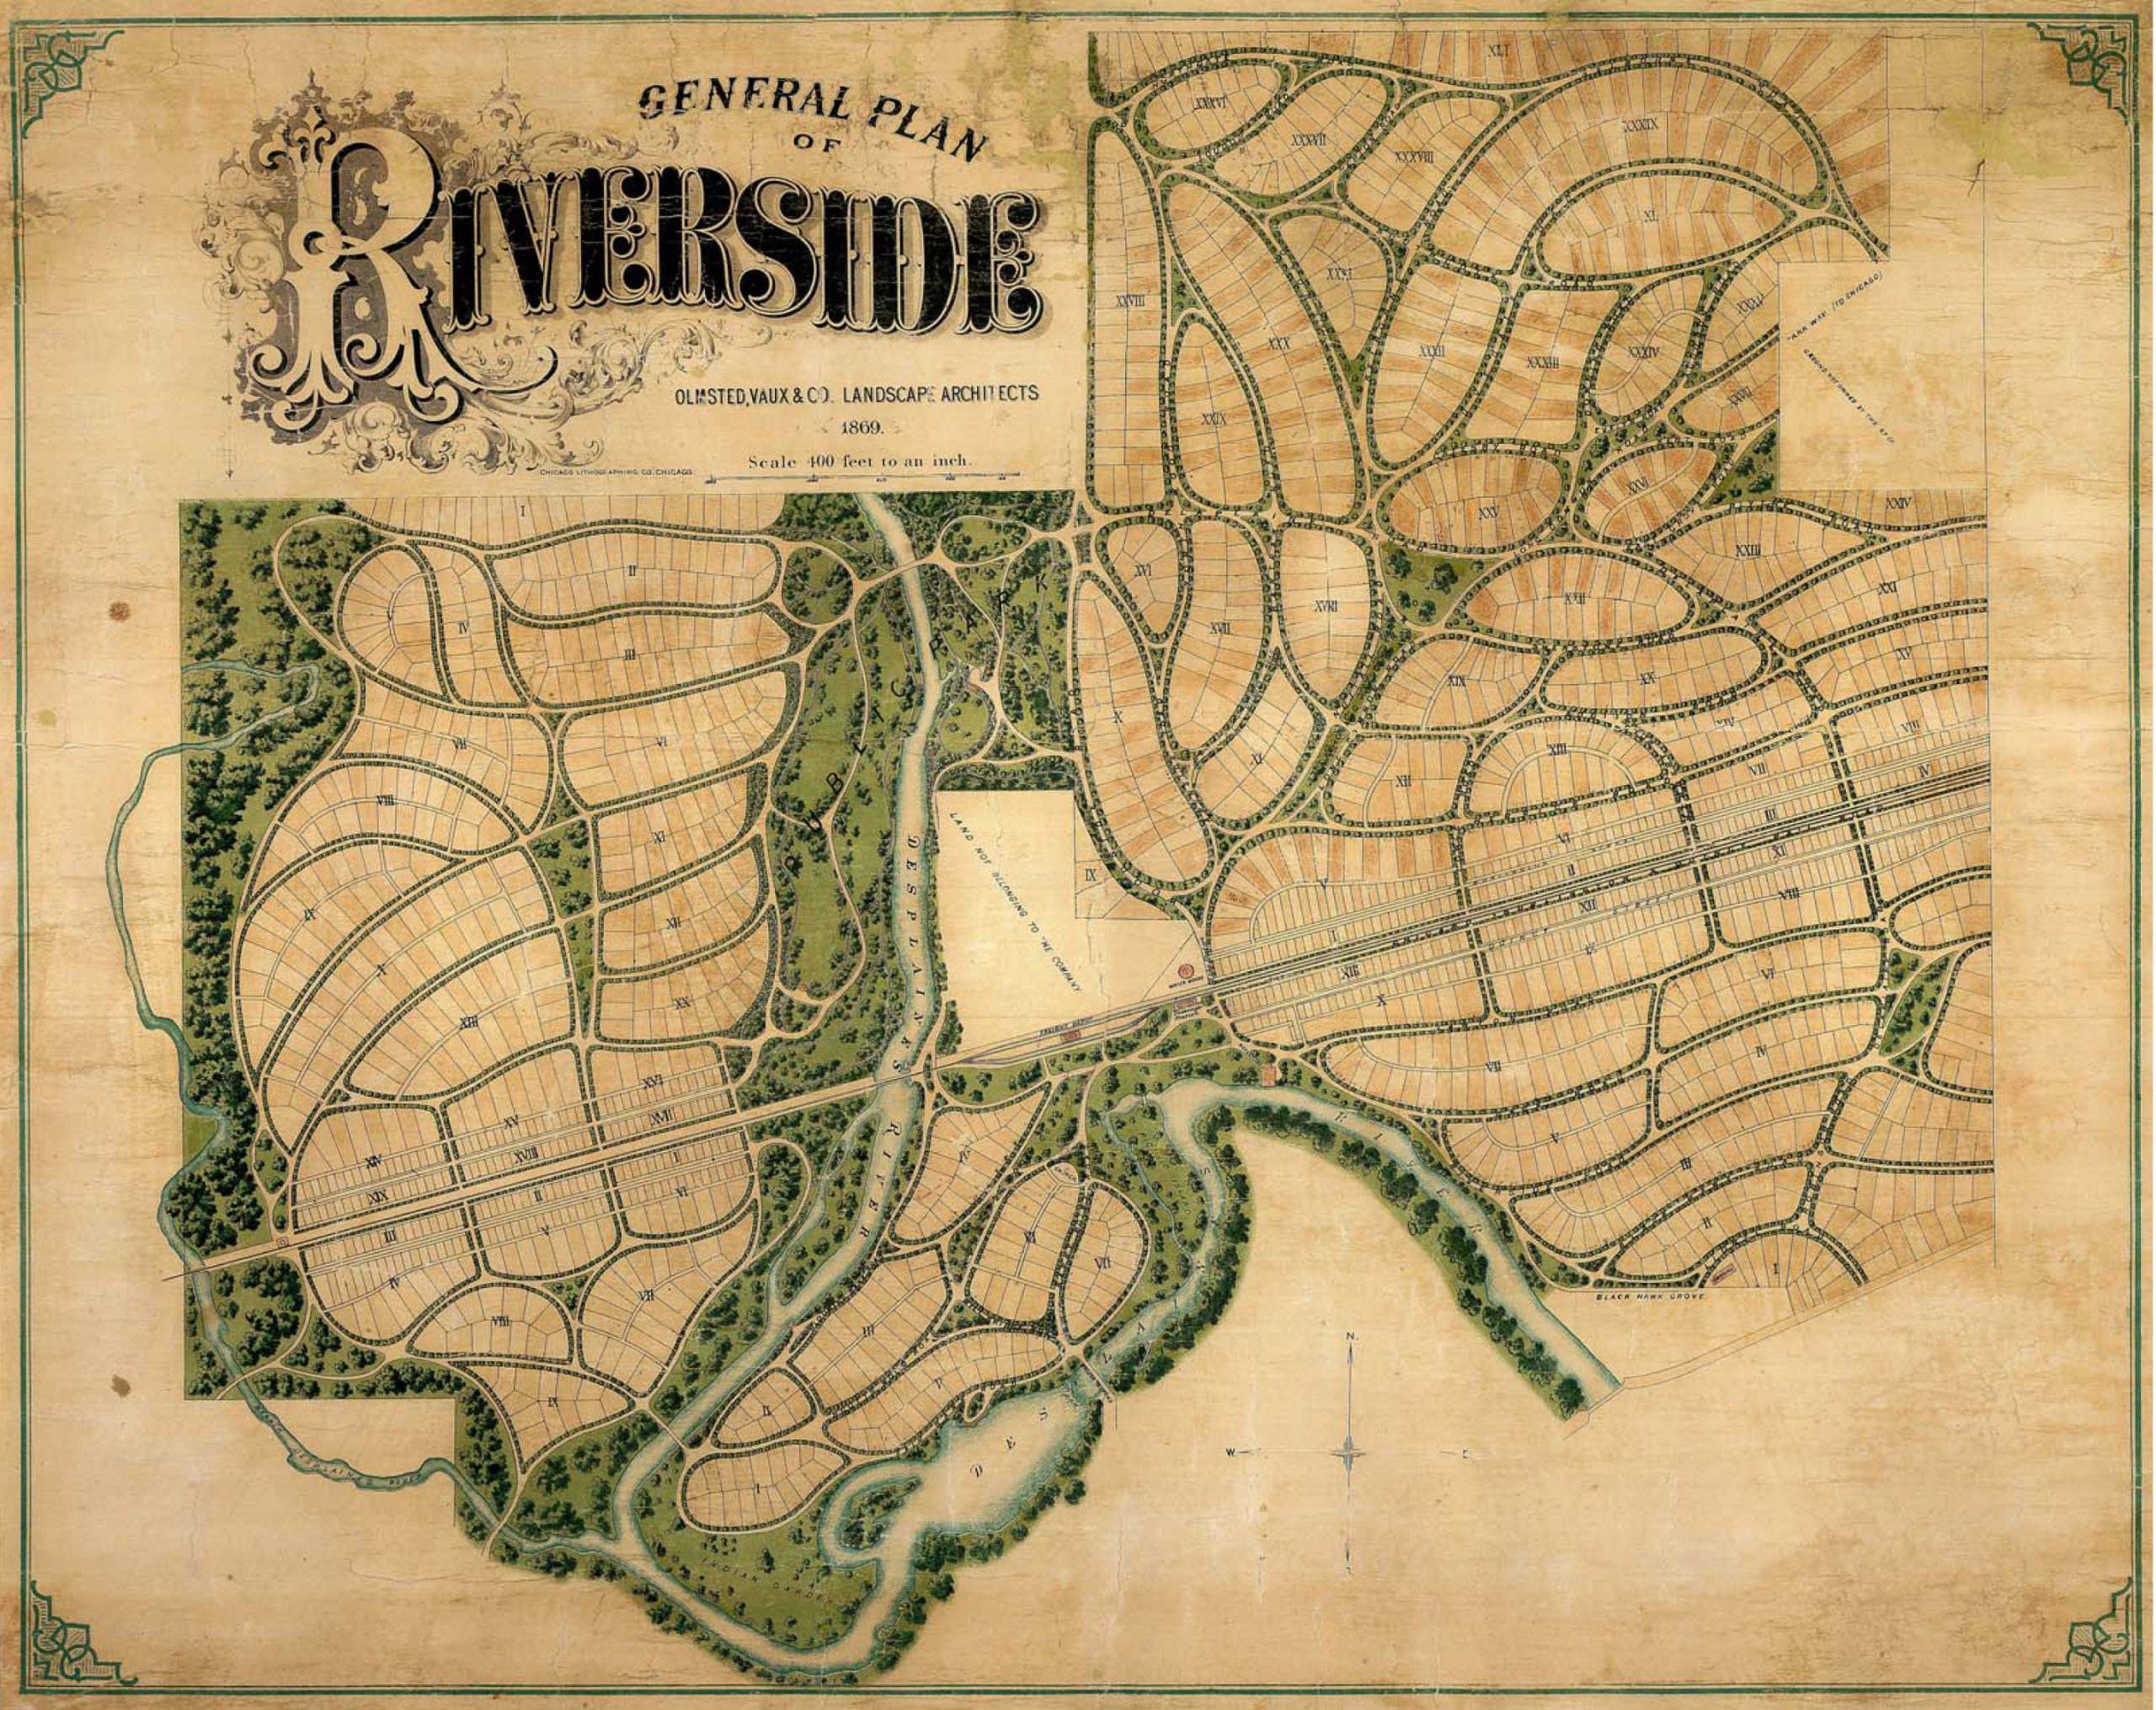 Sepia-toned plan of the village of Riverside with curved streets, plot lines, and trees. “General Plan of Riverside” is printed in curled block text at the top left. 